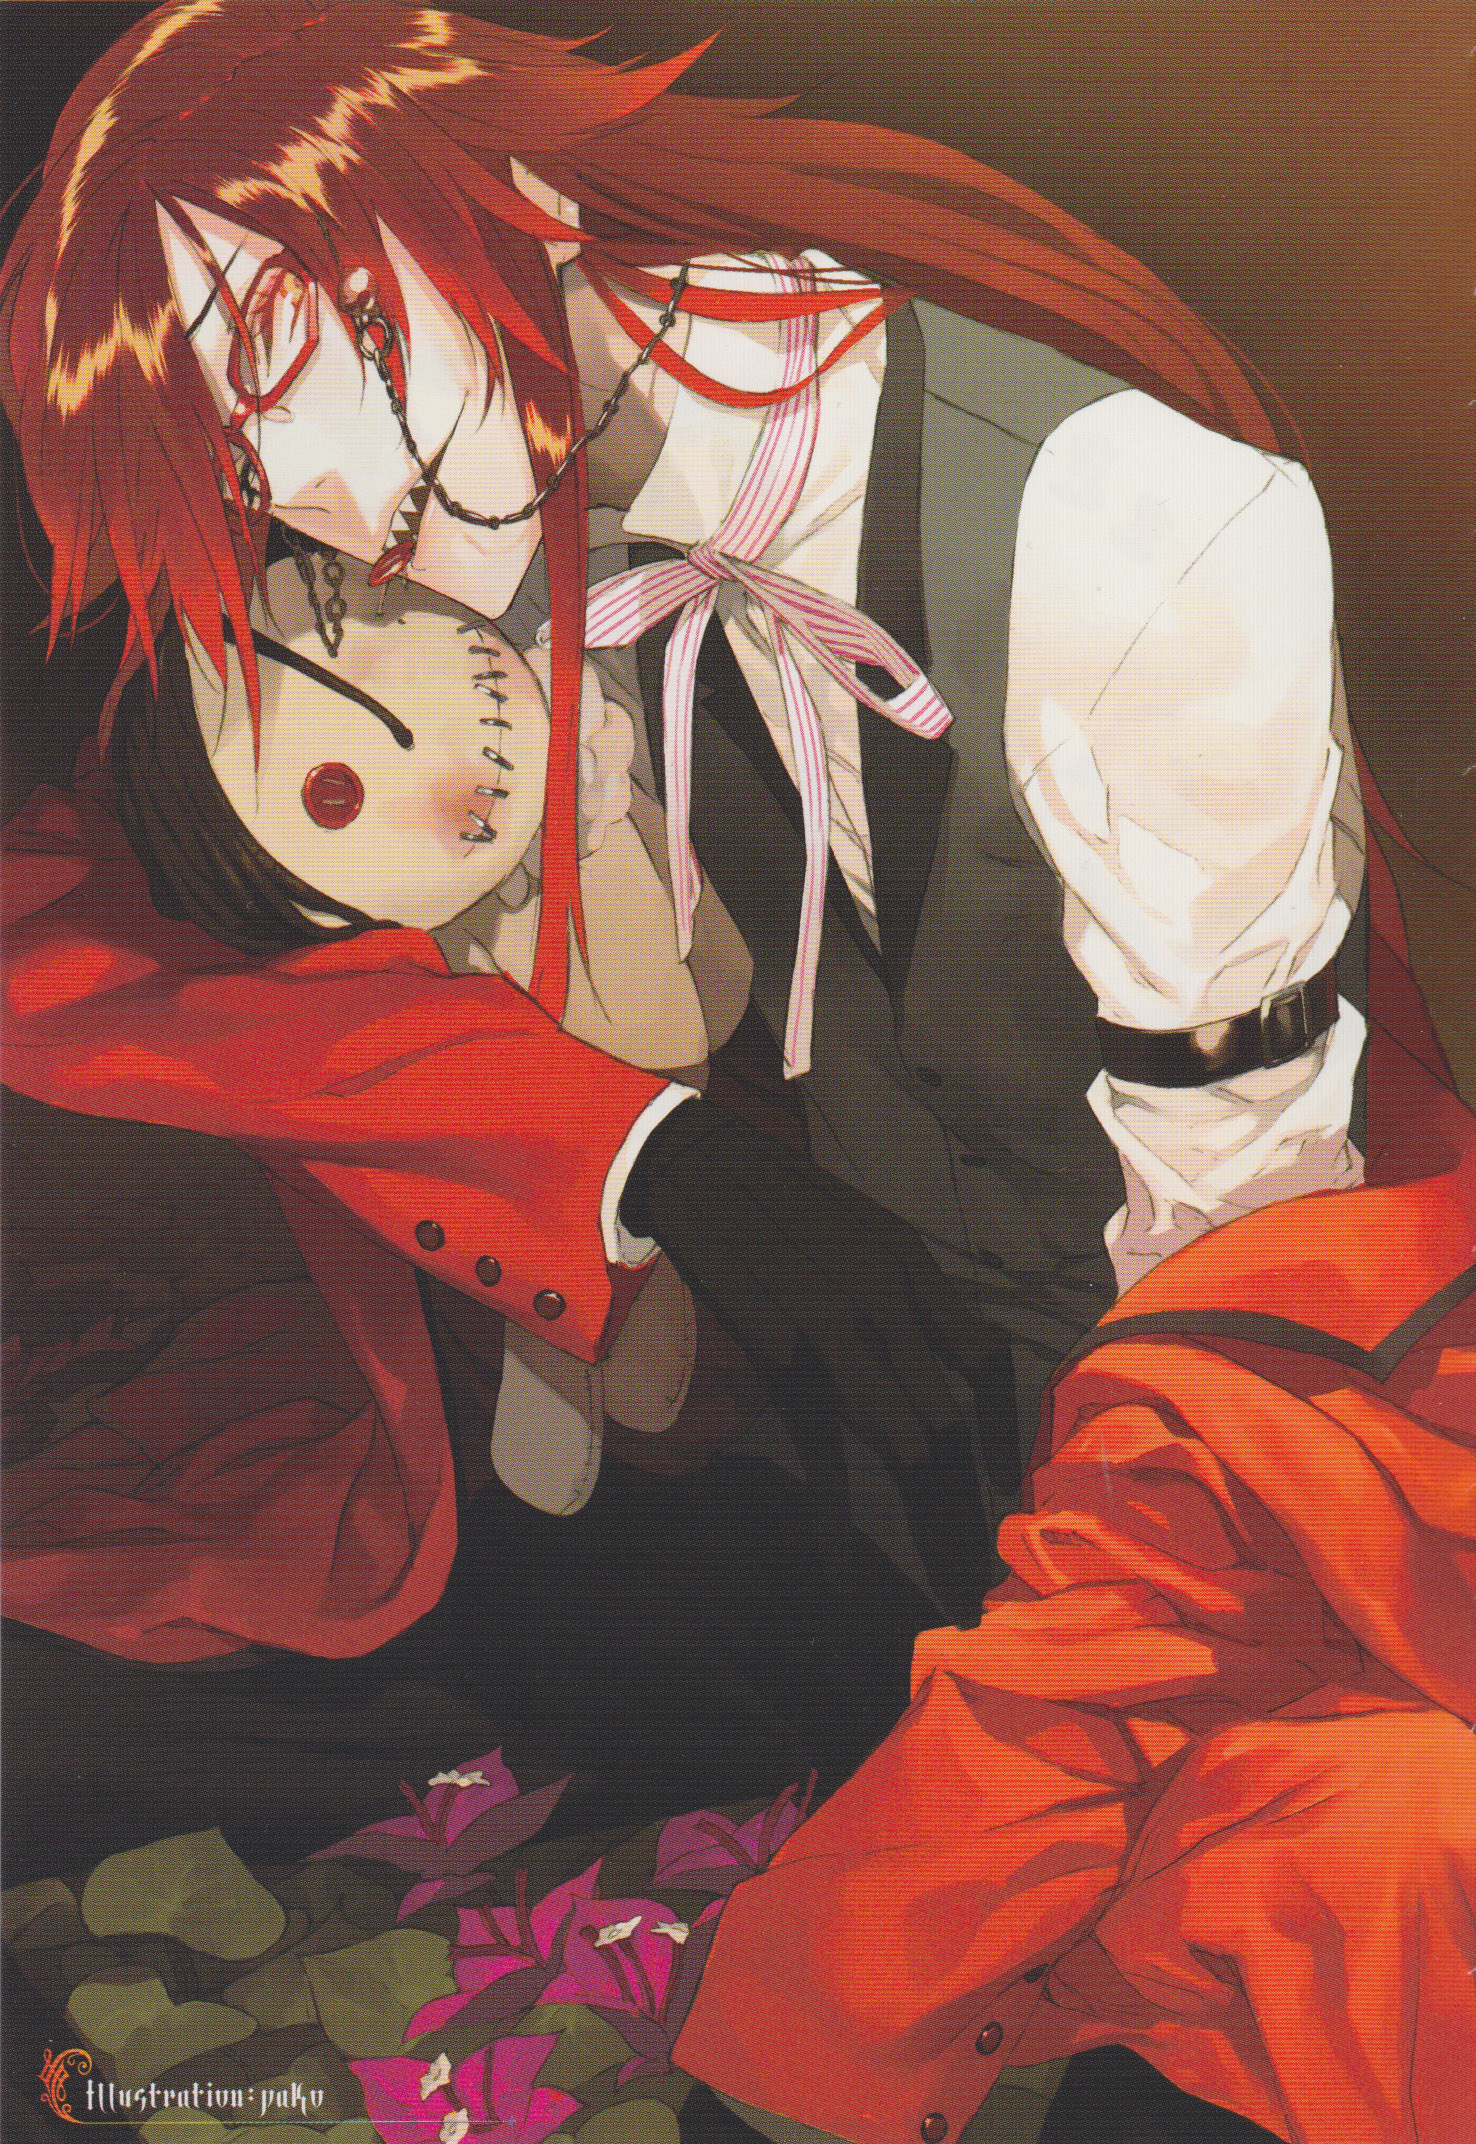 Grell Sutcliff: The series that follows Ciel Phantomhive, the twelve-year-old Earl of Phantomhive serving as the Queen's Watchdog. 1480x2150 HD Background.